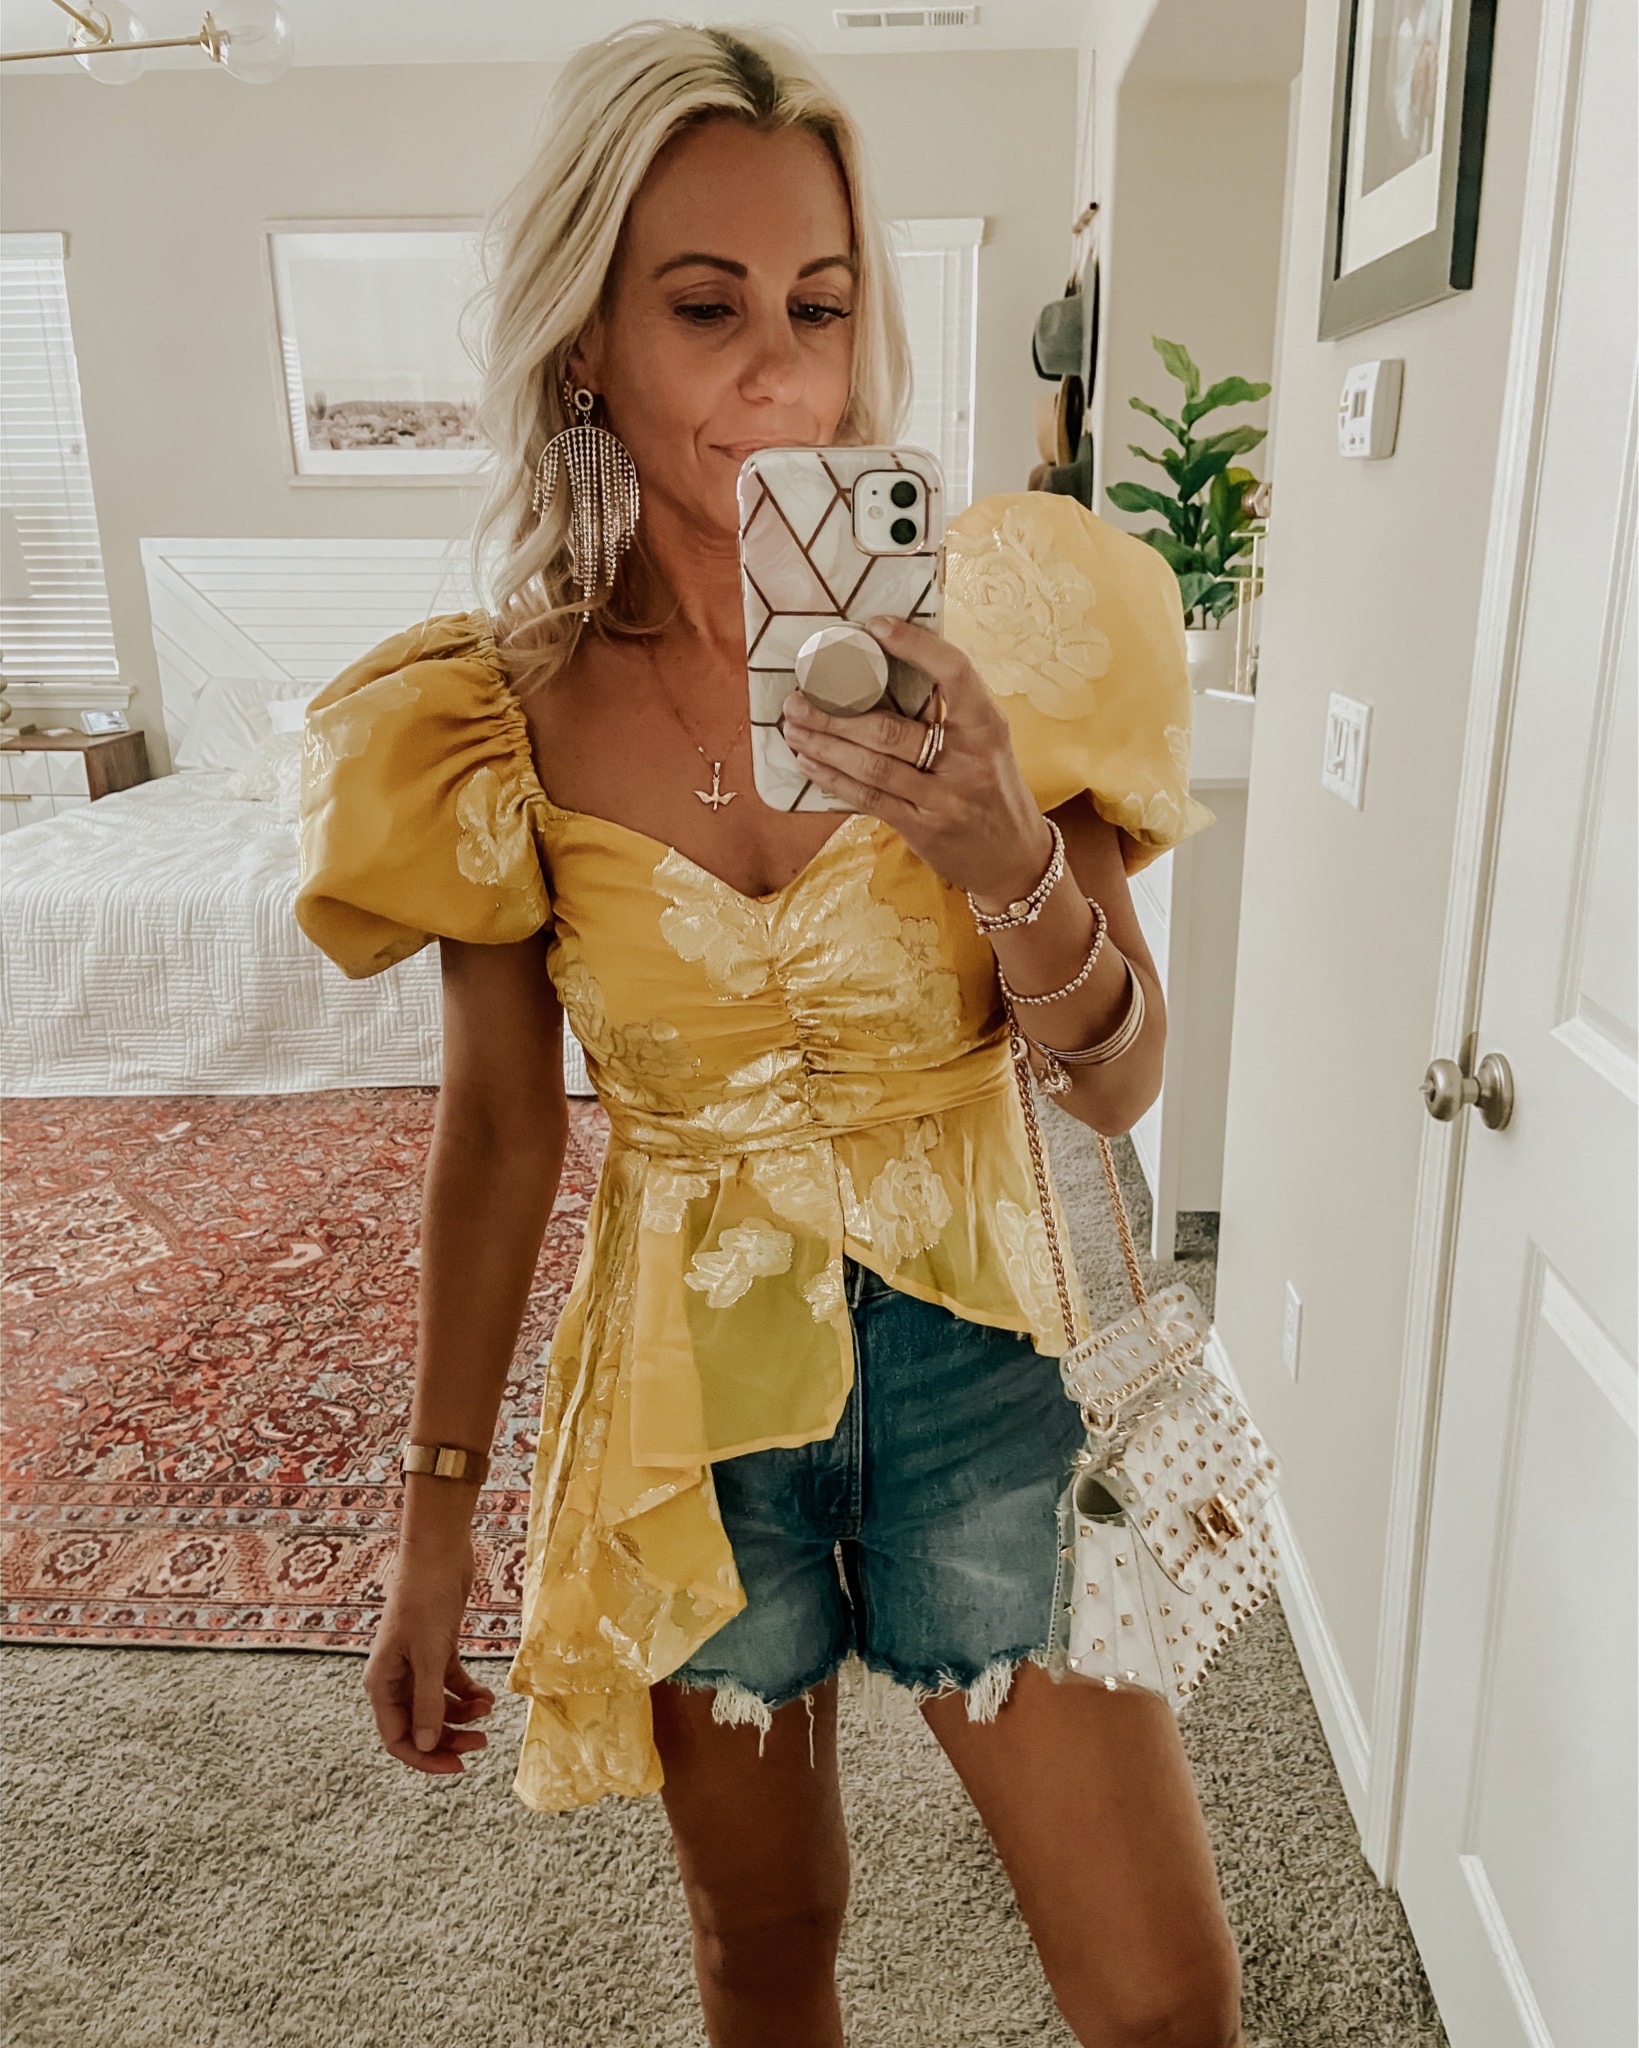 5 WAYS TO STYLE DENIM SHORTS- Jaclyn De Leon Style- Sharing a few different ways to style denim shorts from casual + cool to dressed up for date night